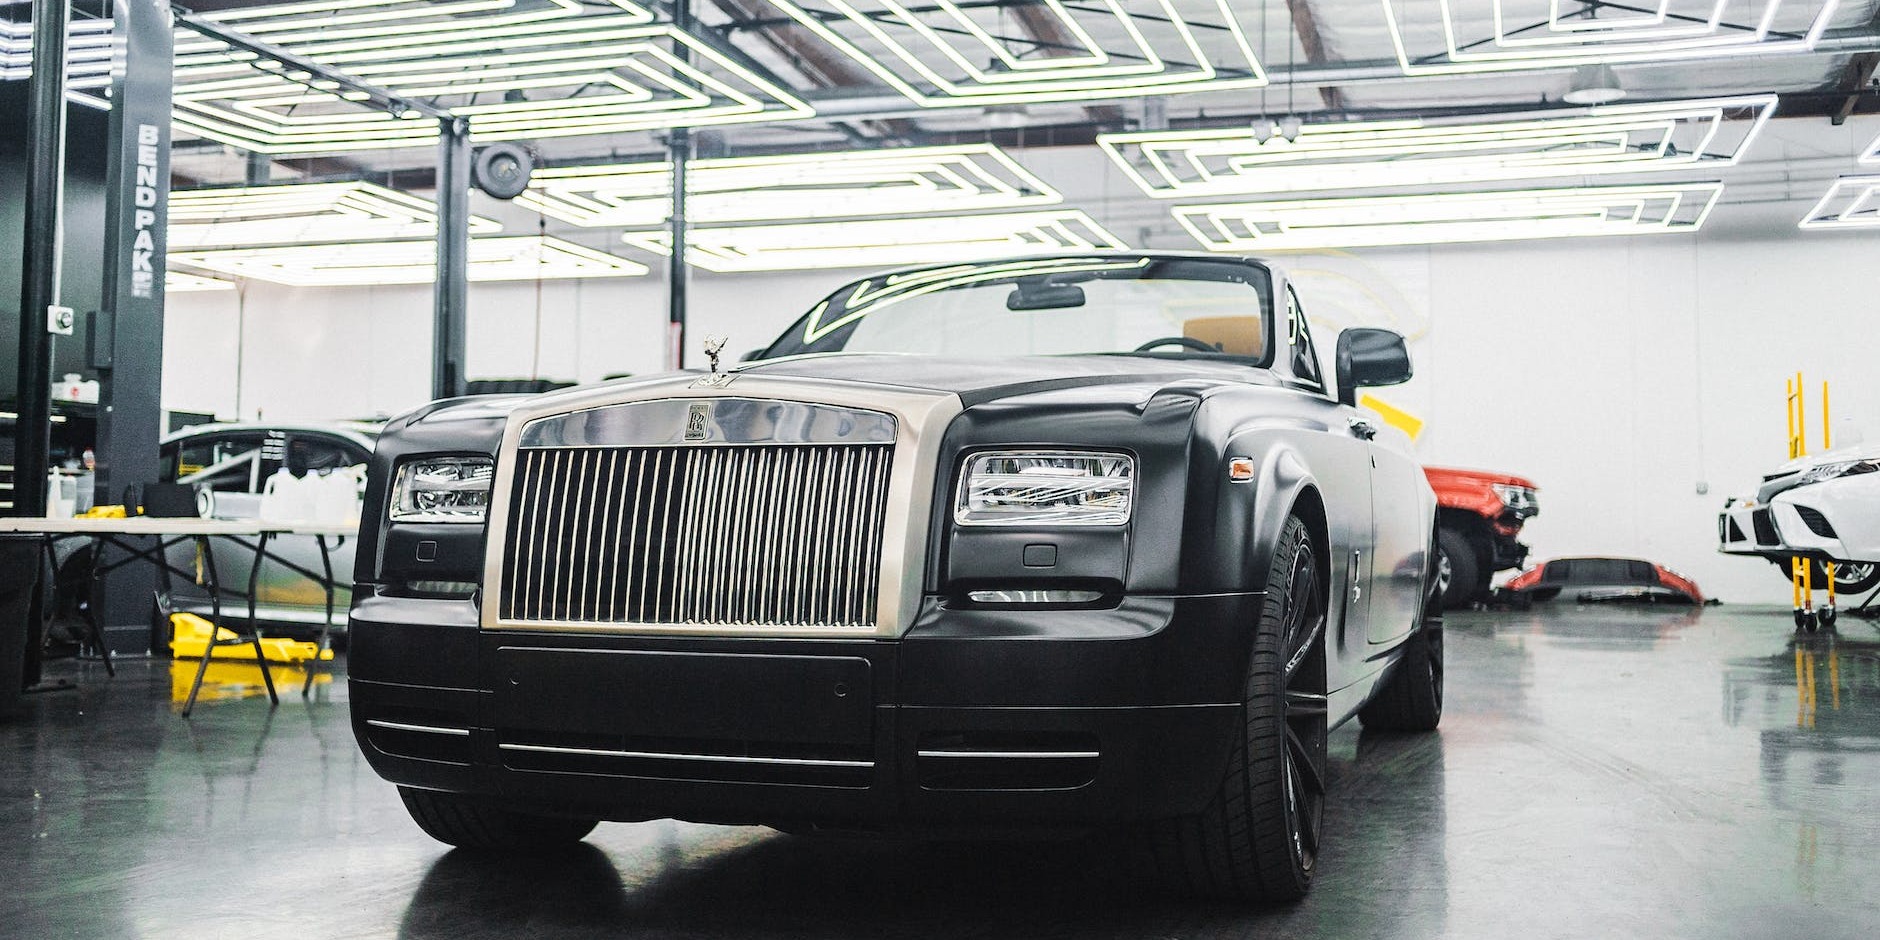 Maintaining Your Rolls Royce: Expert Tips for Manchester's Luxury Car Owners